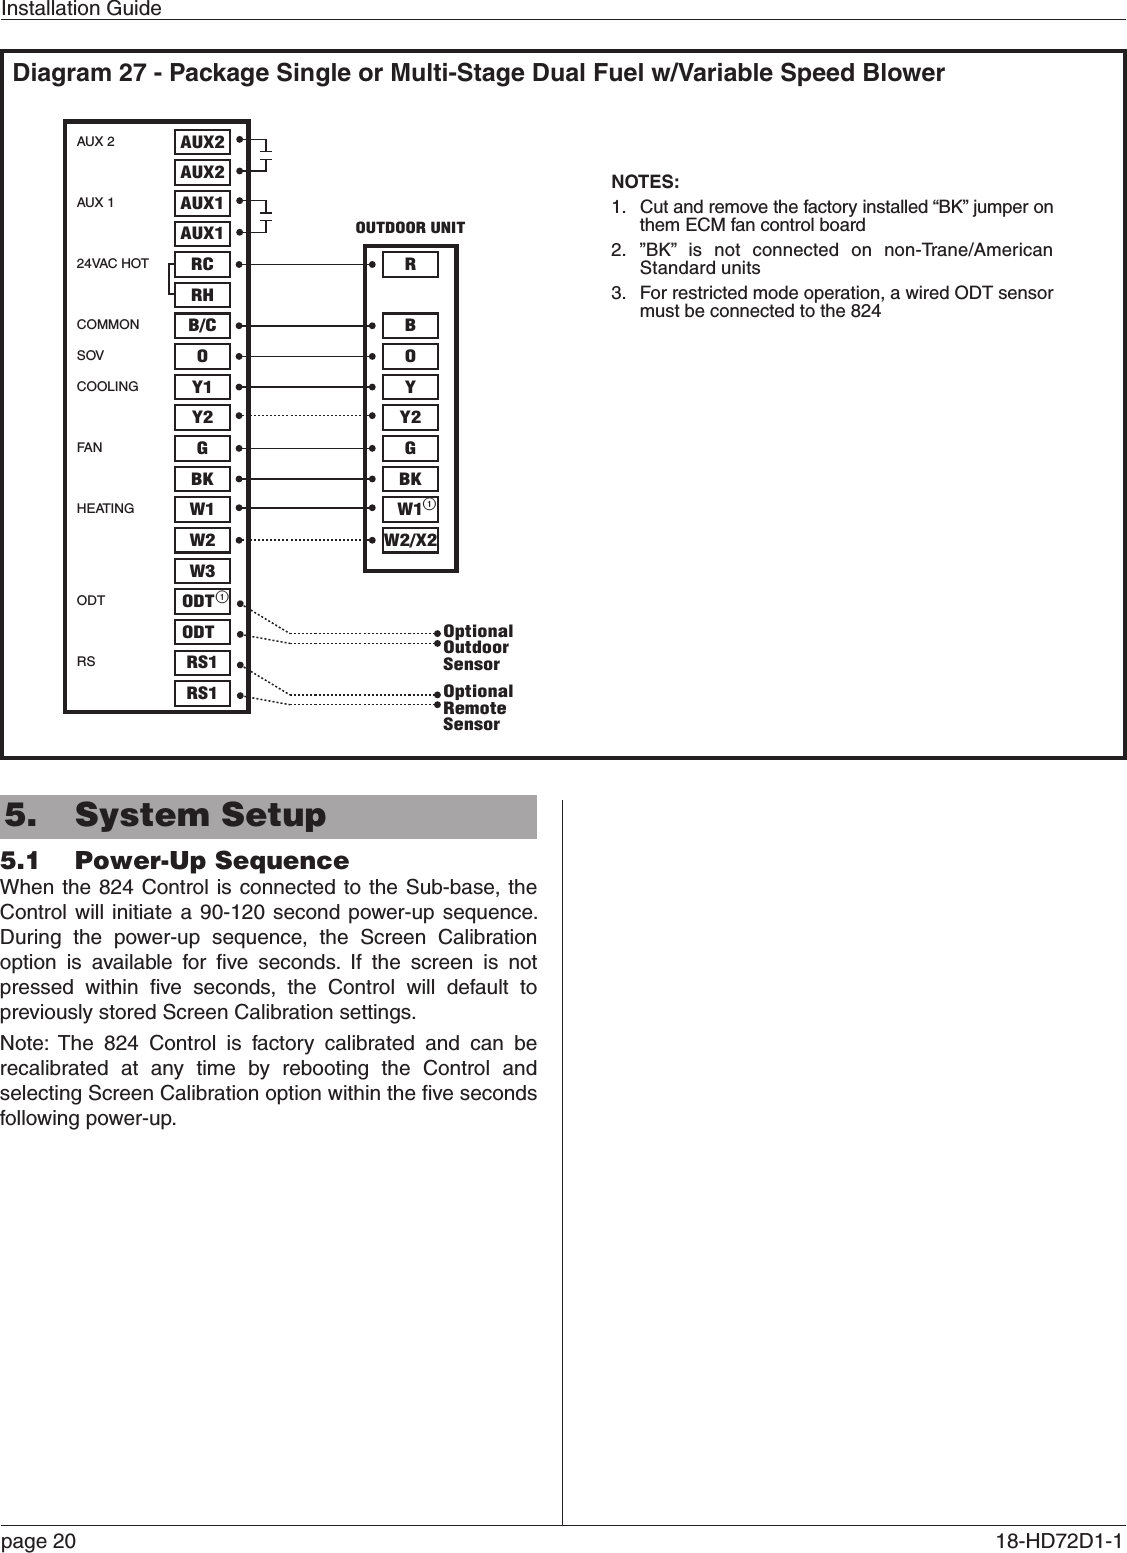 Installation Guidepage 20  18-HD72D1-1 5.  System Setup5.1  Power-Up SequenceWhen the 824 Control is connected to the Sub-base, the Control will initiate a 90-120 second power-up sequence. During the power-up sequence, the Screen Calibration option is available for ﬁve seconds. If the screen is not pressed within ﬁve seconds, the Control will default to previously stored Screen Calibration settings.Note: The 824 Control is factory calibrated and can be recalibrated at any time by rebooting the Control and selecting Screen Calibration option within the ﬁve seconds following power-up.Diagram 27 - Package Single or Multi-Stage Dual Fuel w/Variable Speed BlowerAUX 2AUX 124VAC HOTCOMMONSOVCOOLINGFA NHEATINGODTRSAUX2AUX2AUX1AUX1RCRHB/COY1Y2 Y2GBKW1W2GBKW1W2/X2W3ODTODTRS1RS1ORBY27- Package Single or Multi-Stage Dual Fuel with Variable Speed BlowerOUTDOOR UNITNOTES:1.  Cut and remove the factory installed “BK” jumper on them ECM fan control board2. ”BK” is not connected on non-Trane/American Standard units3.  For restricted mode operation, a wired ODT sensor must be connected to the 824OptionalOutdoorSensorOptionalRemoteSensor11